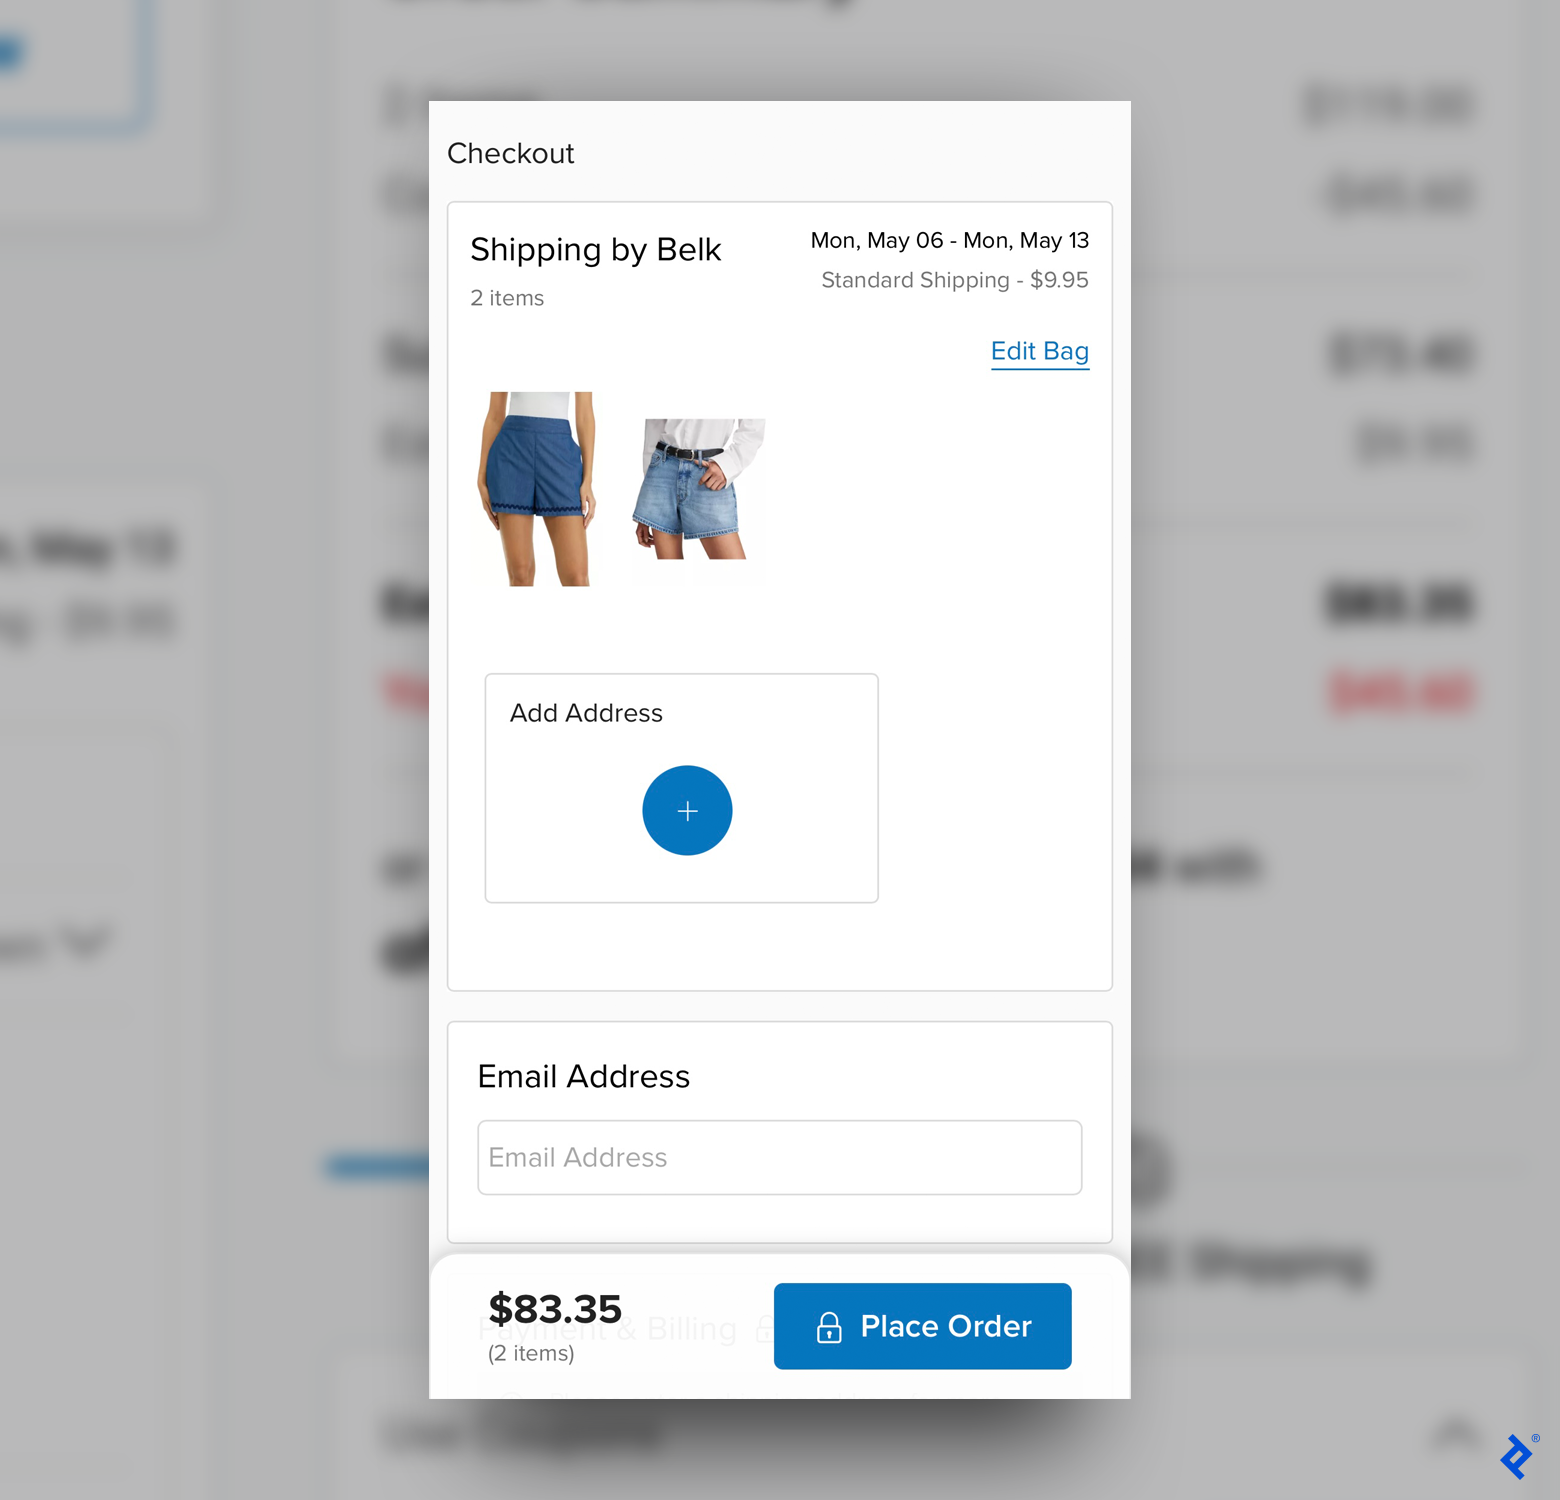 The redesigned checkout page shows two pairs of shorts, shipping method, fields for the user’s address and email, total cost, and a blue “place order” button.